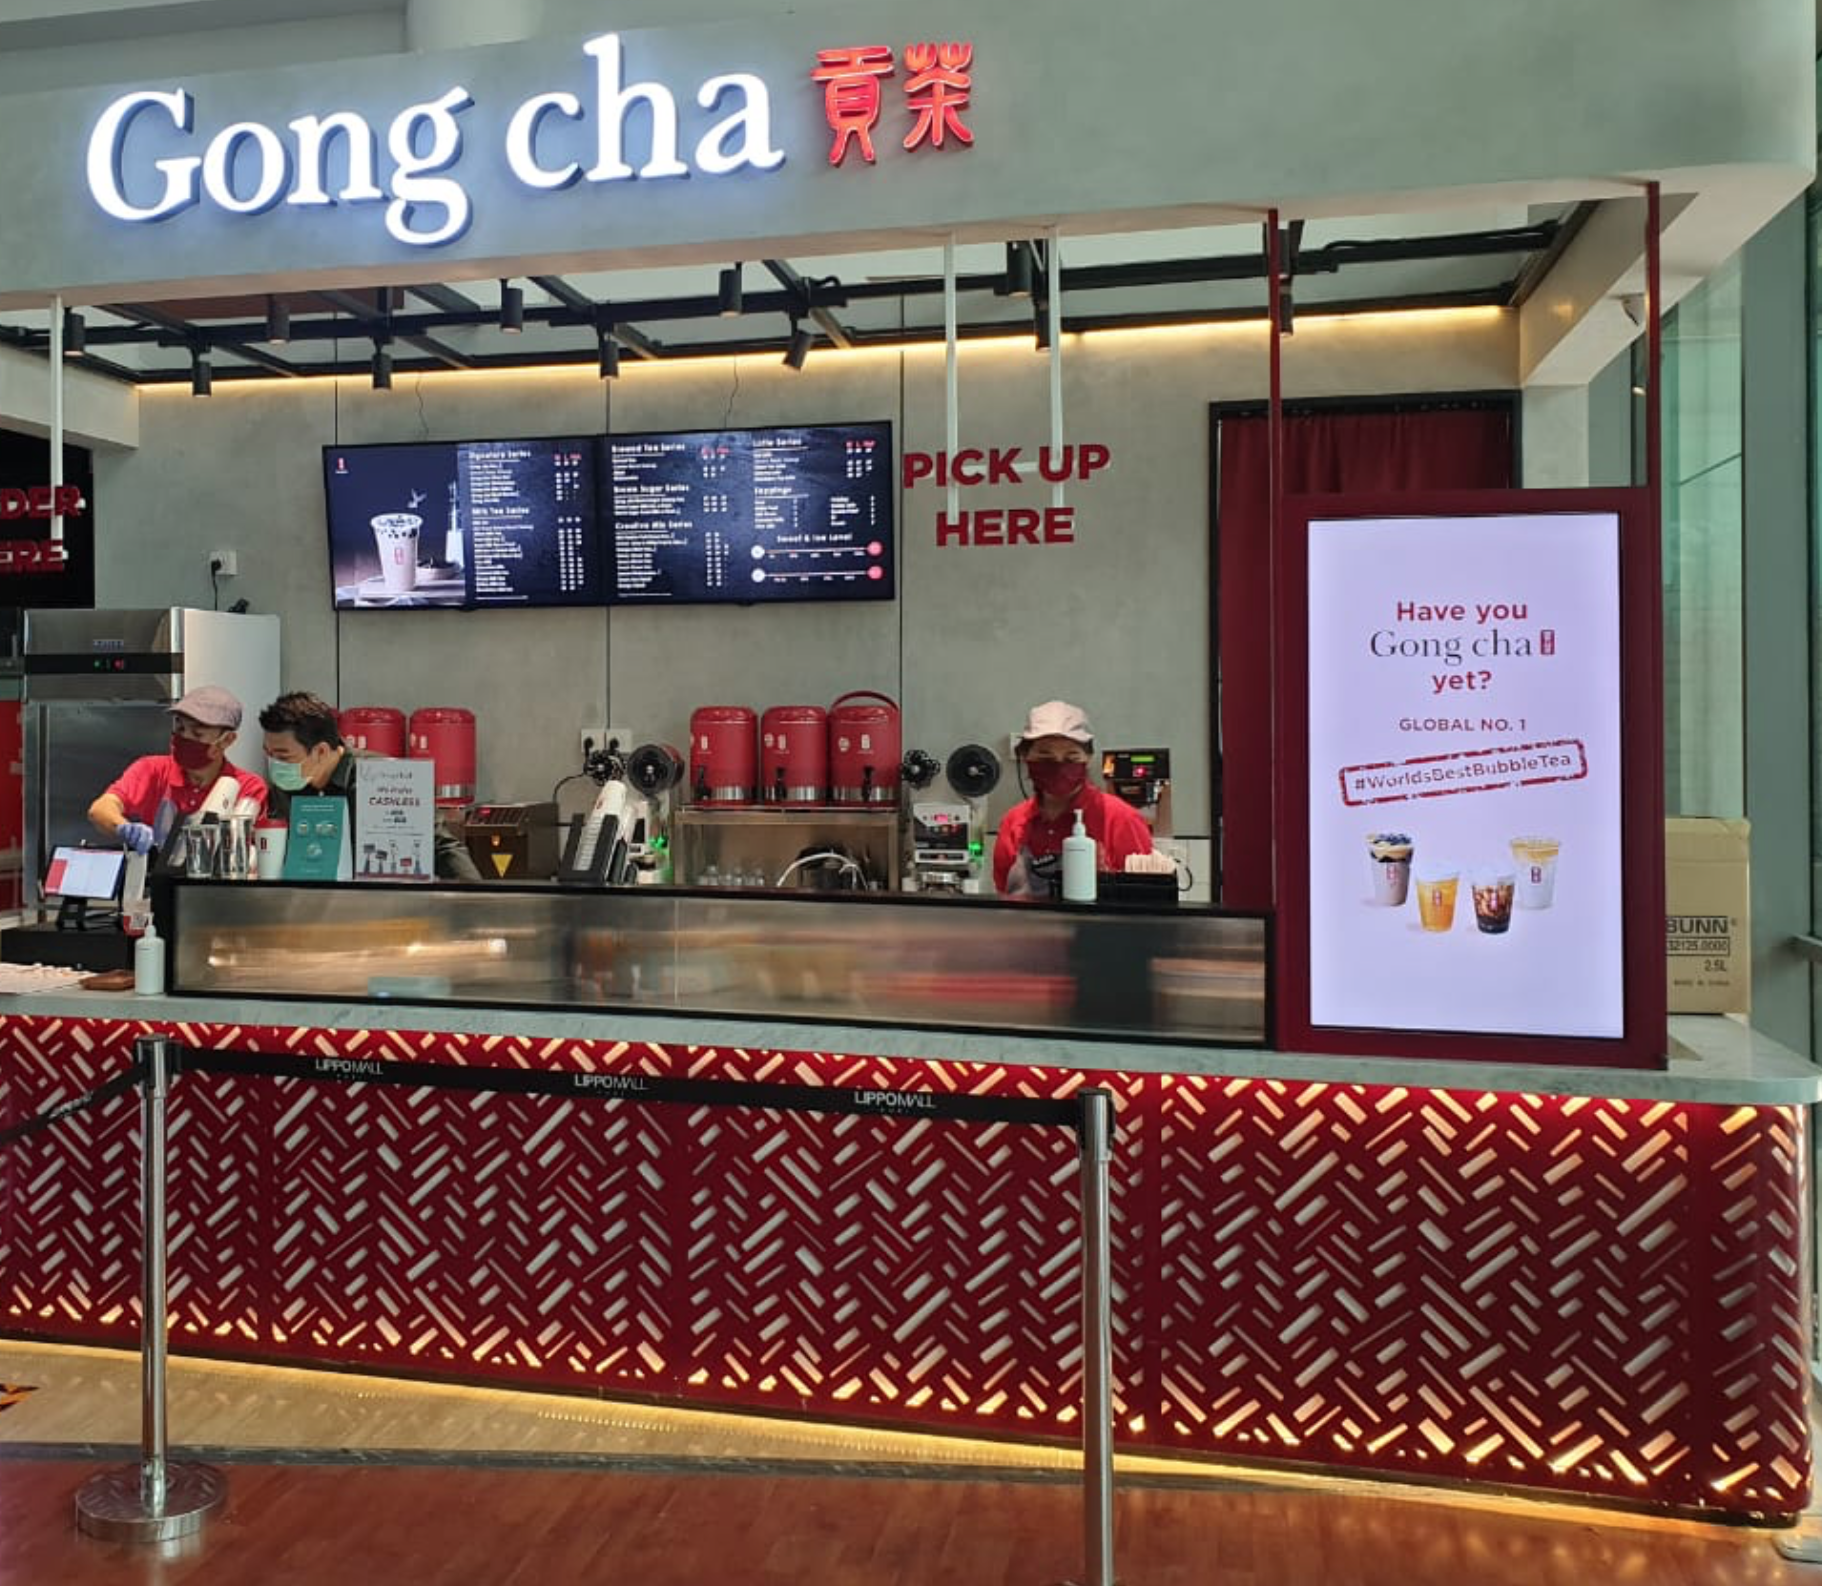 Gong Cha shop front in lippo mall puri st. moritz